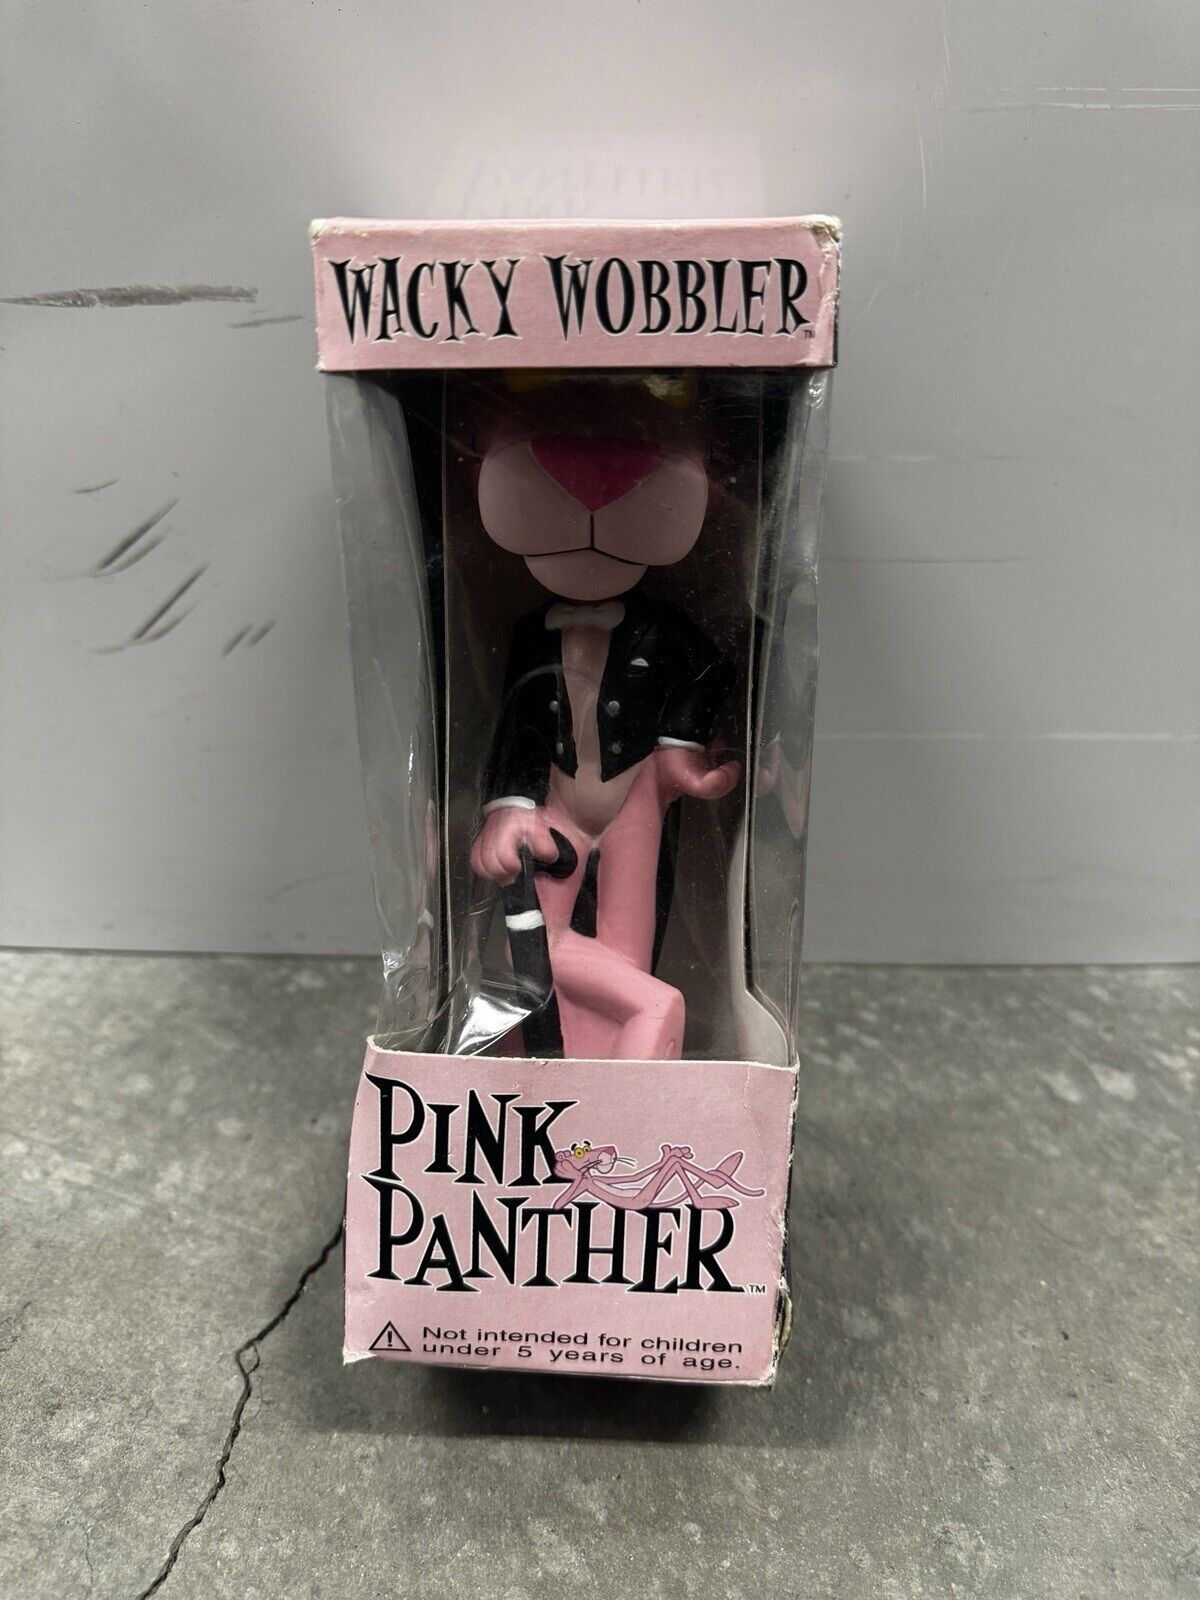 Vintage 2001 FUNKO Pink Panther Wacky Wobbler New Opened Damaged Box See Pics